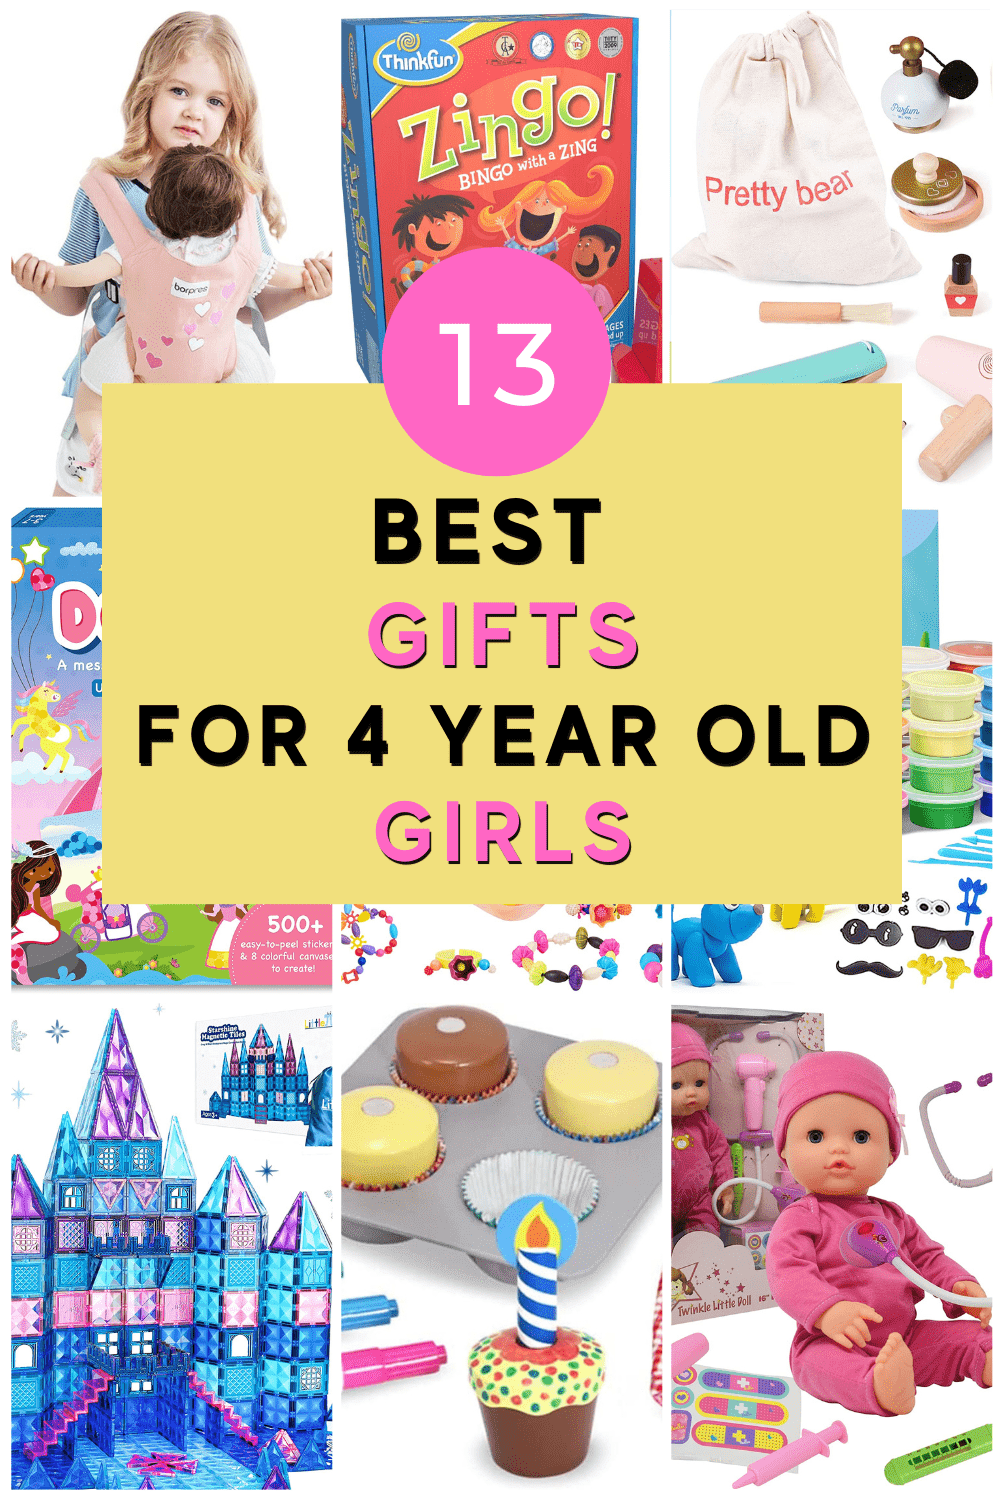 AISDE 8 Year Old Girl Gifts Blanket, Gifts for 8 Year Old Girls, Birthday  Gifts for 8 Year Old Girls, 8 Year Old Girl Birthday Gift, 8 Year Old Gift